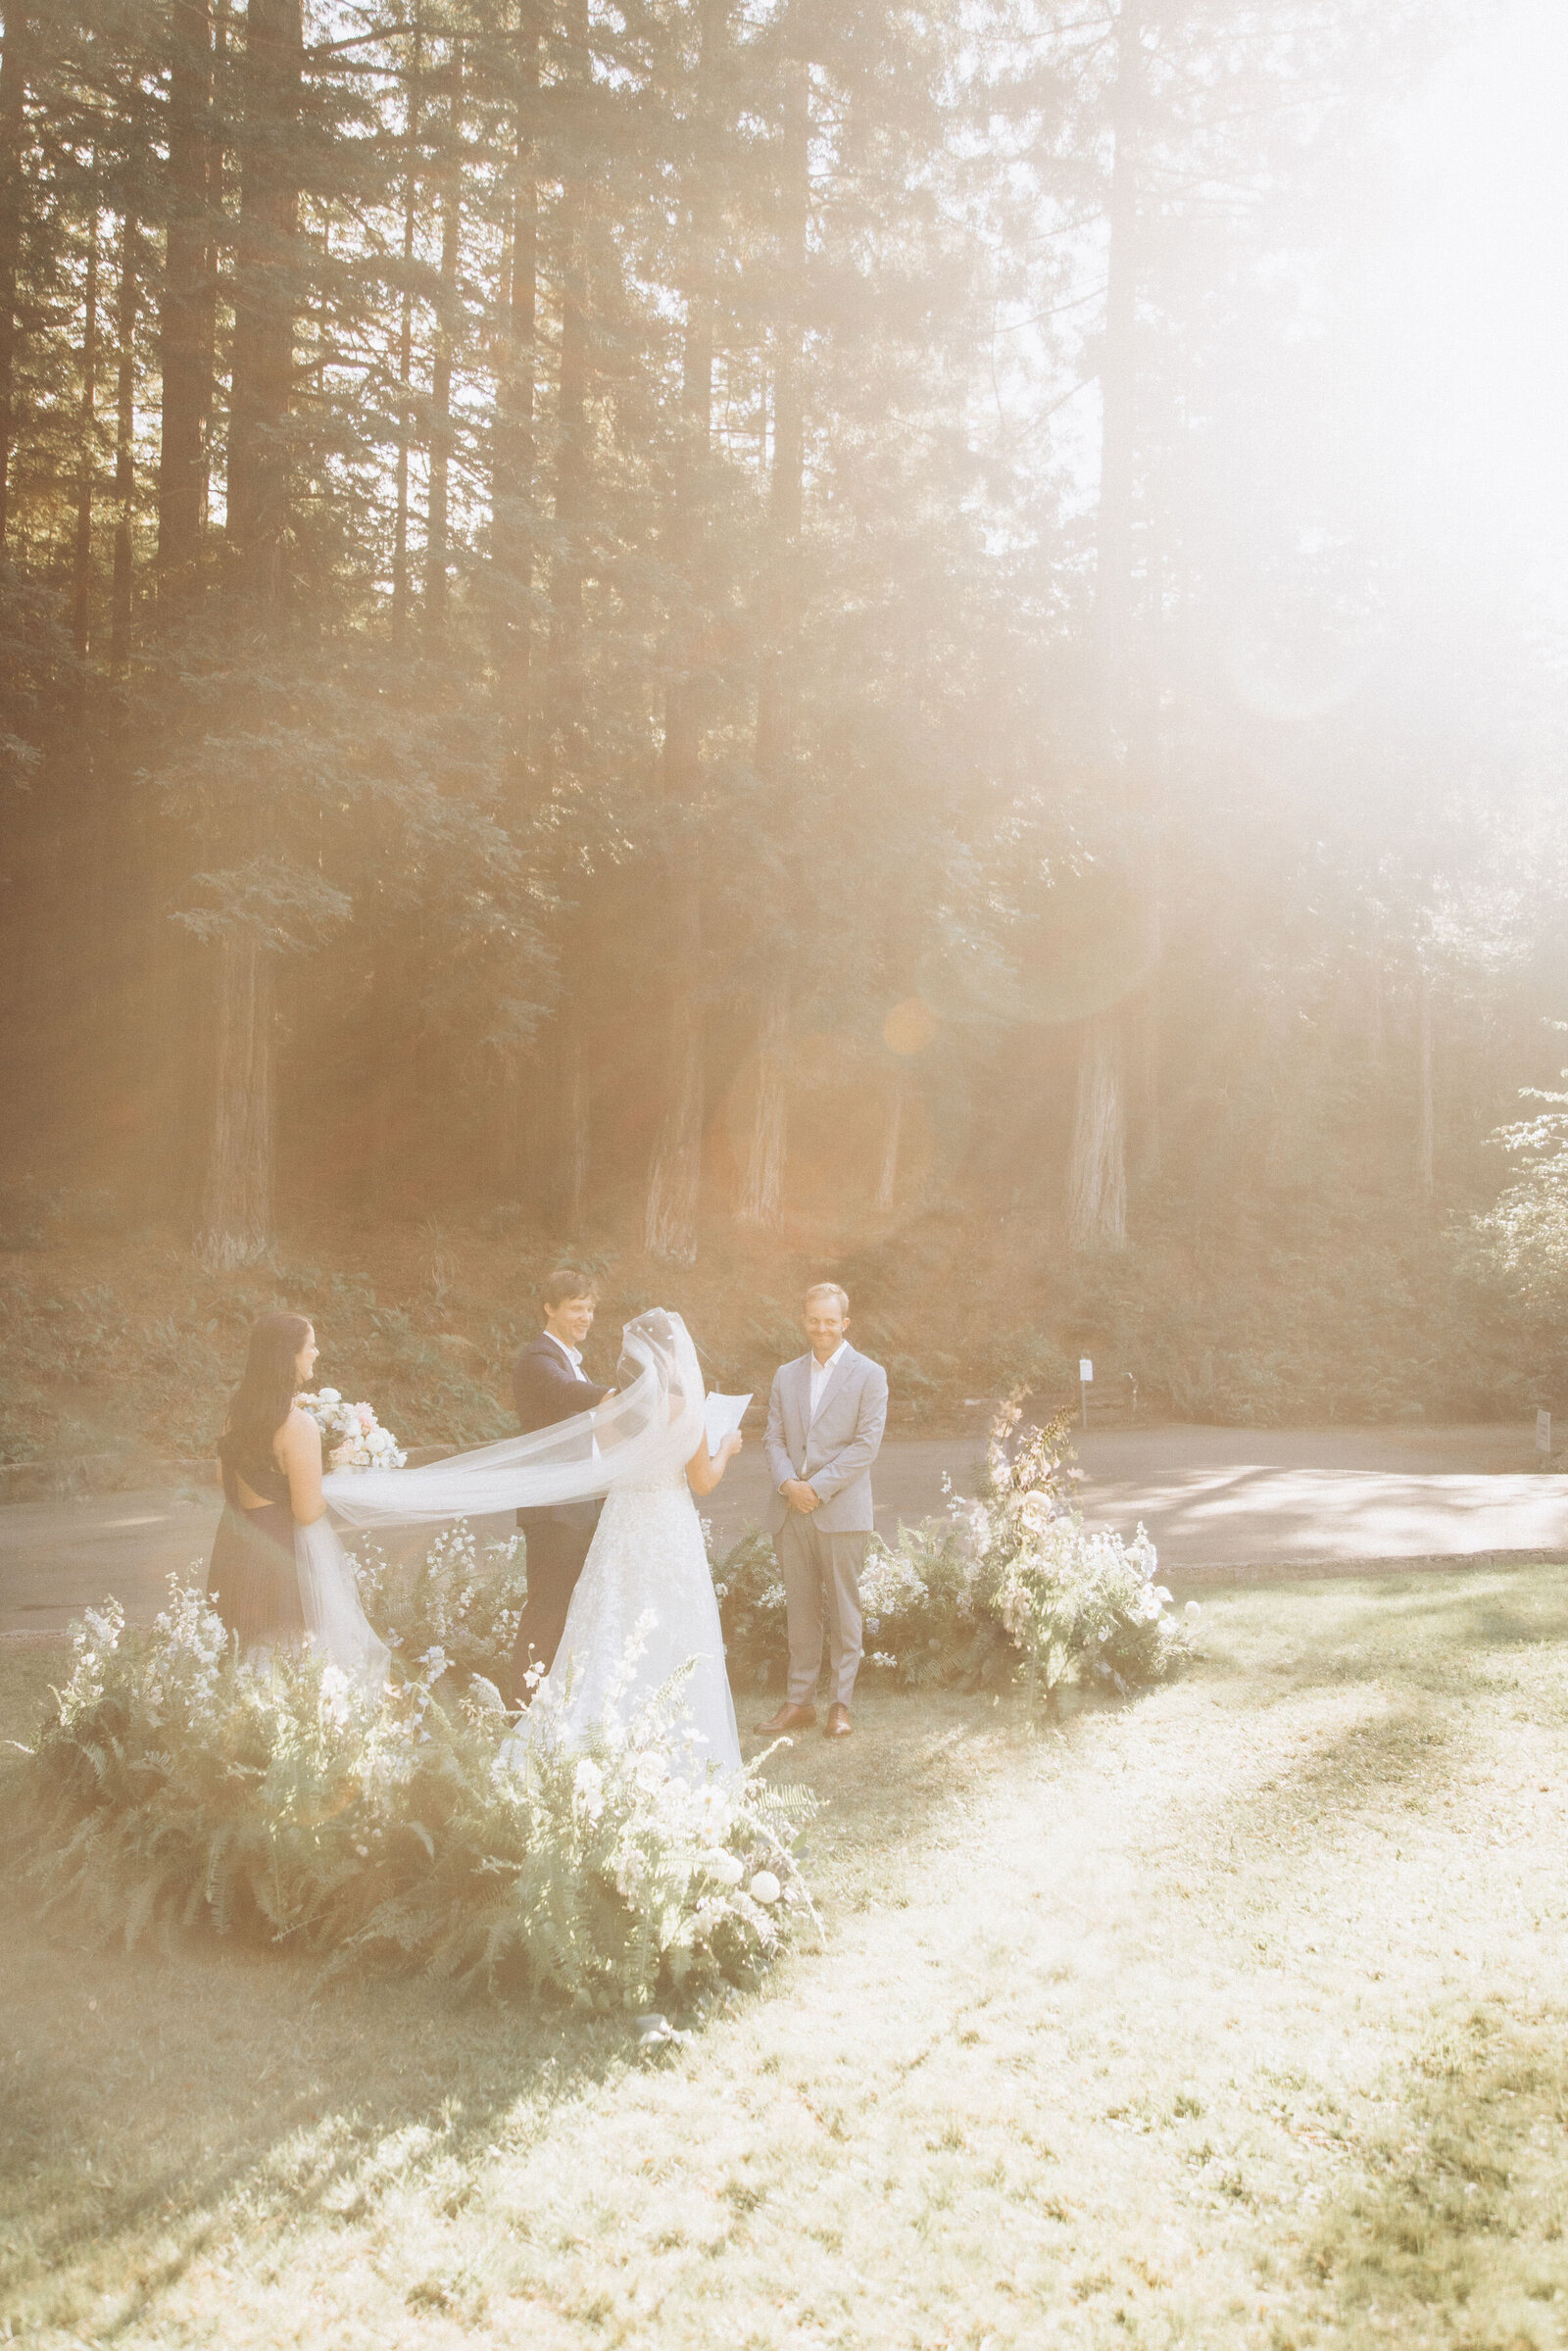 A wedding photoshoot in a sunlit forest clearing, with a bride and groom holding hands, facing a celebrant by an arrangement of lush ferns and foliage.